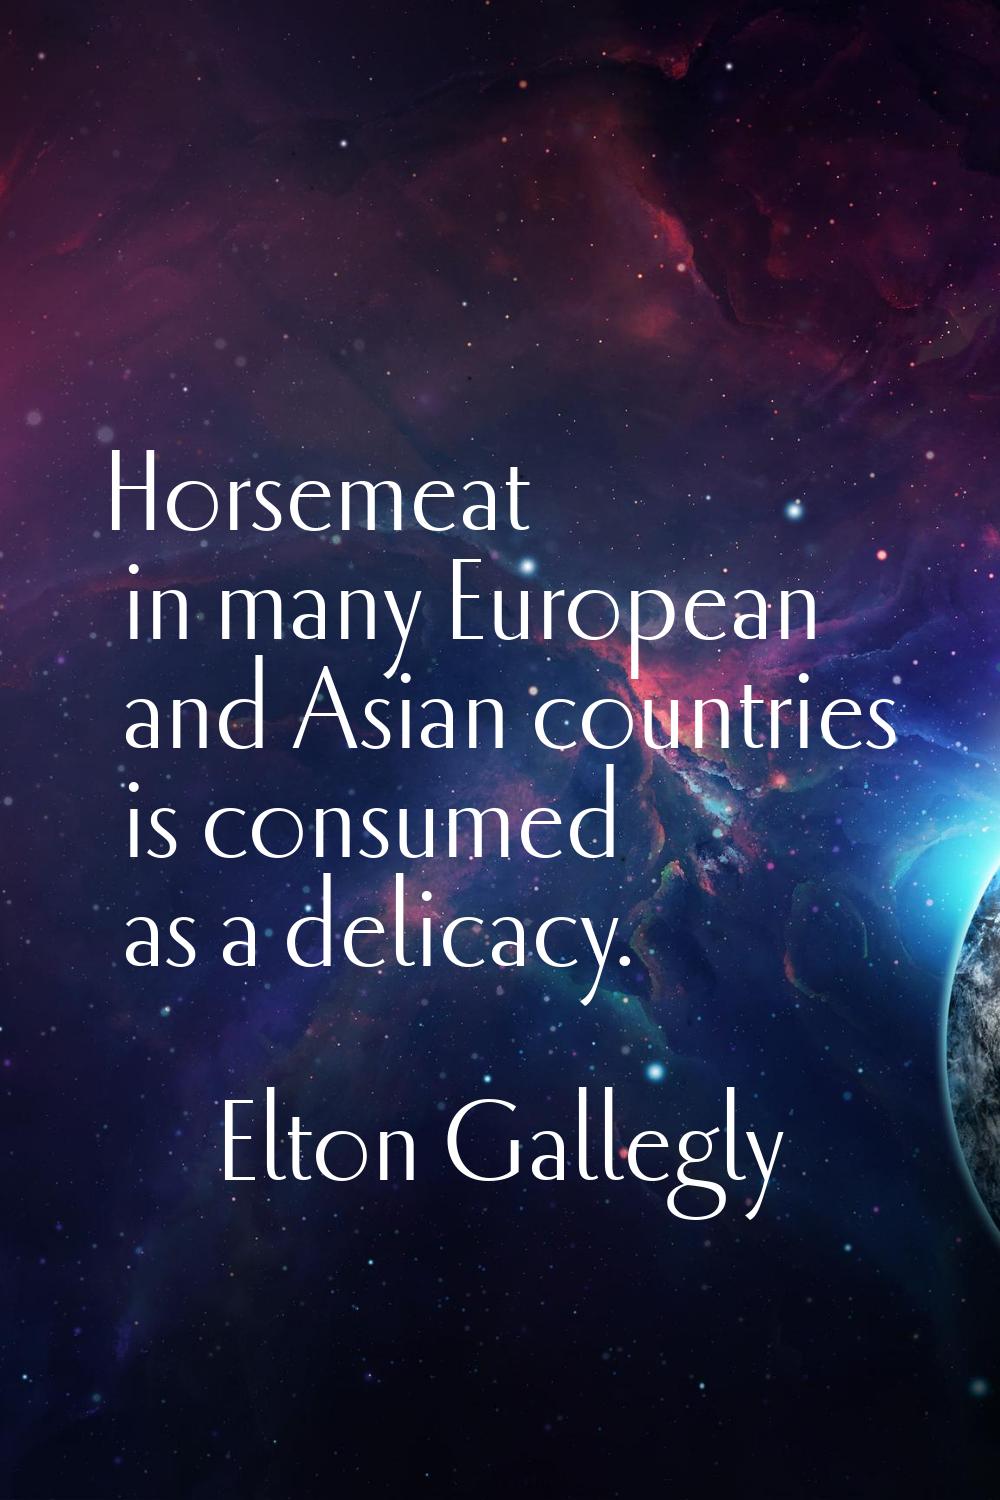 Horsemeat in many European and Asian countries is consumed as a delicacy.